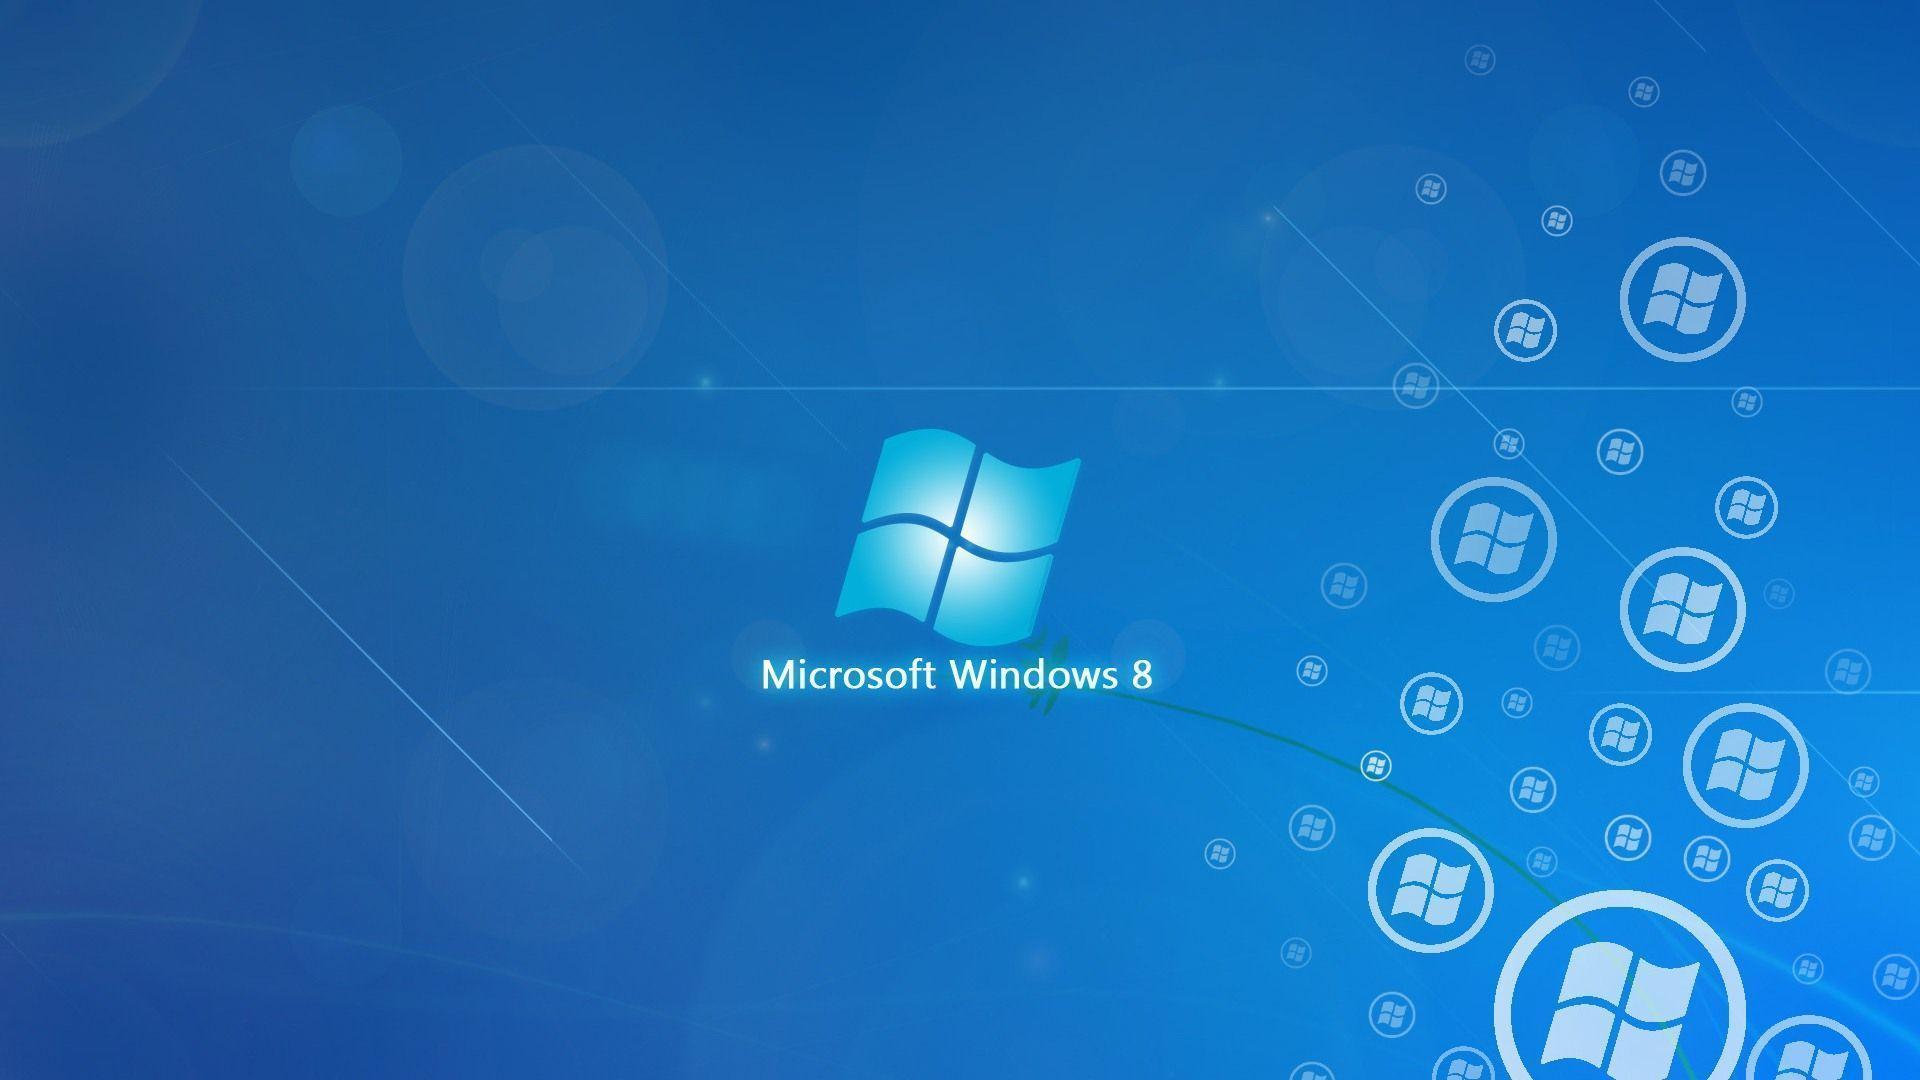 Wallpaper For > Windows 8 Background 1920x1080